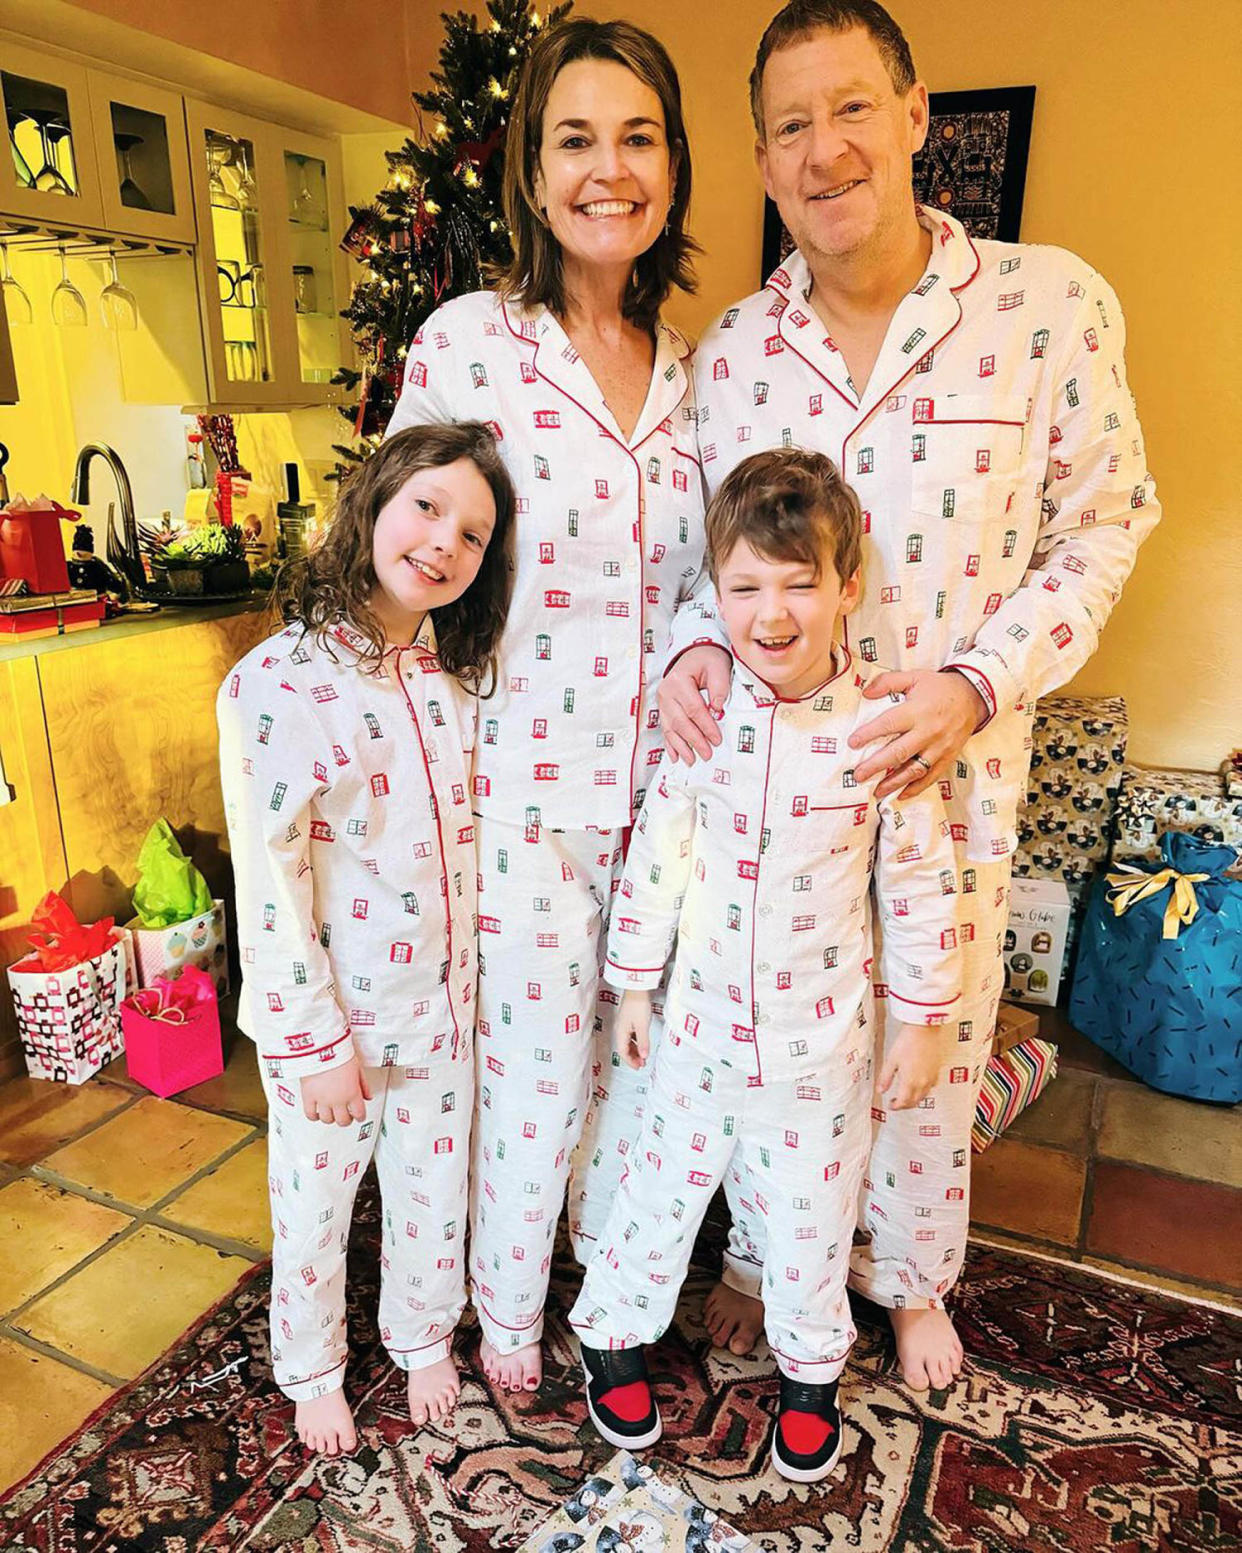 Savannah Guthrie’s family is twinning in holiday PJs in festive pic